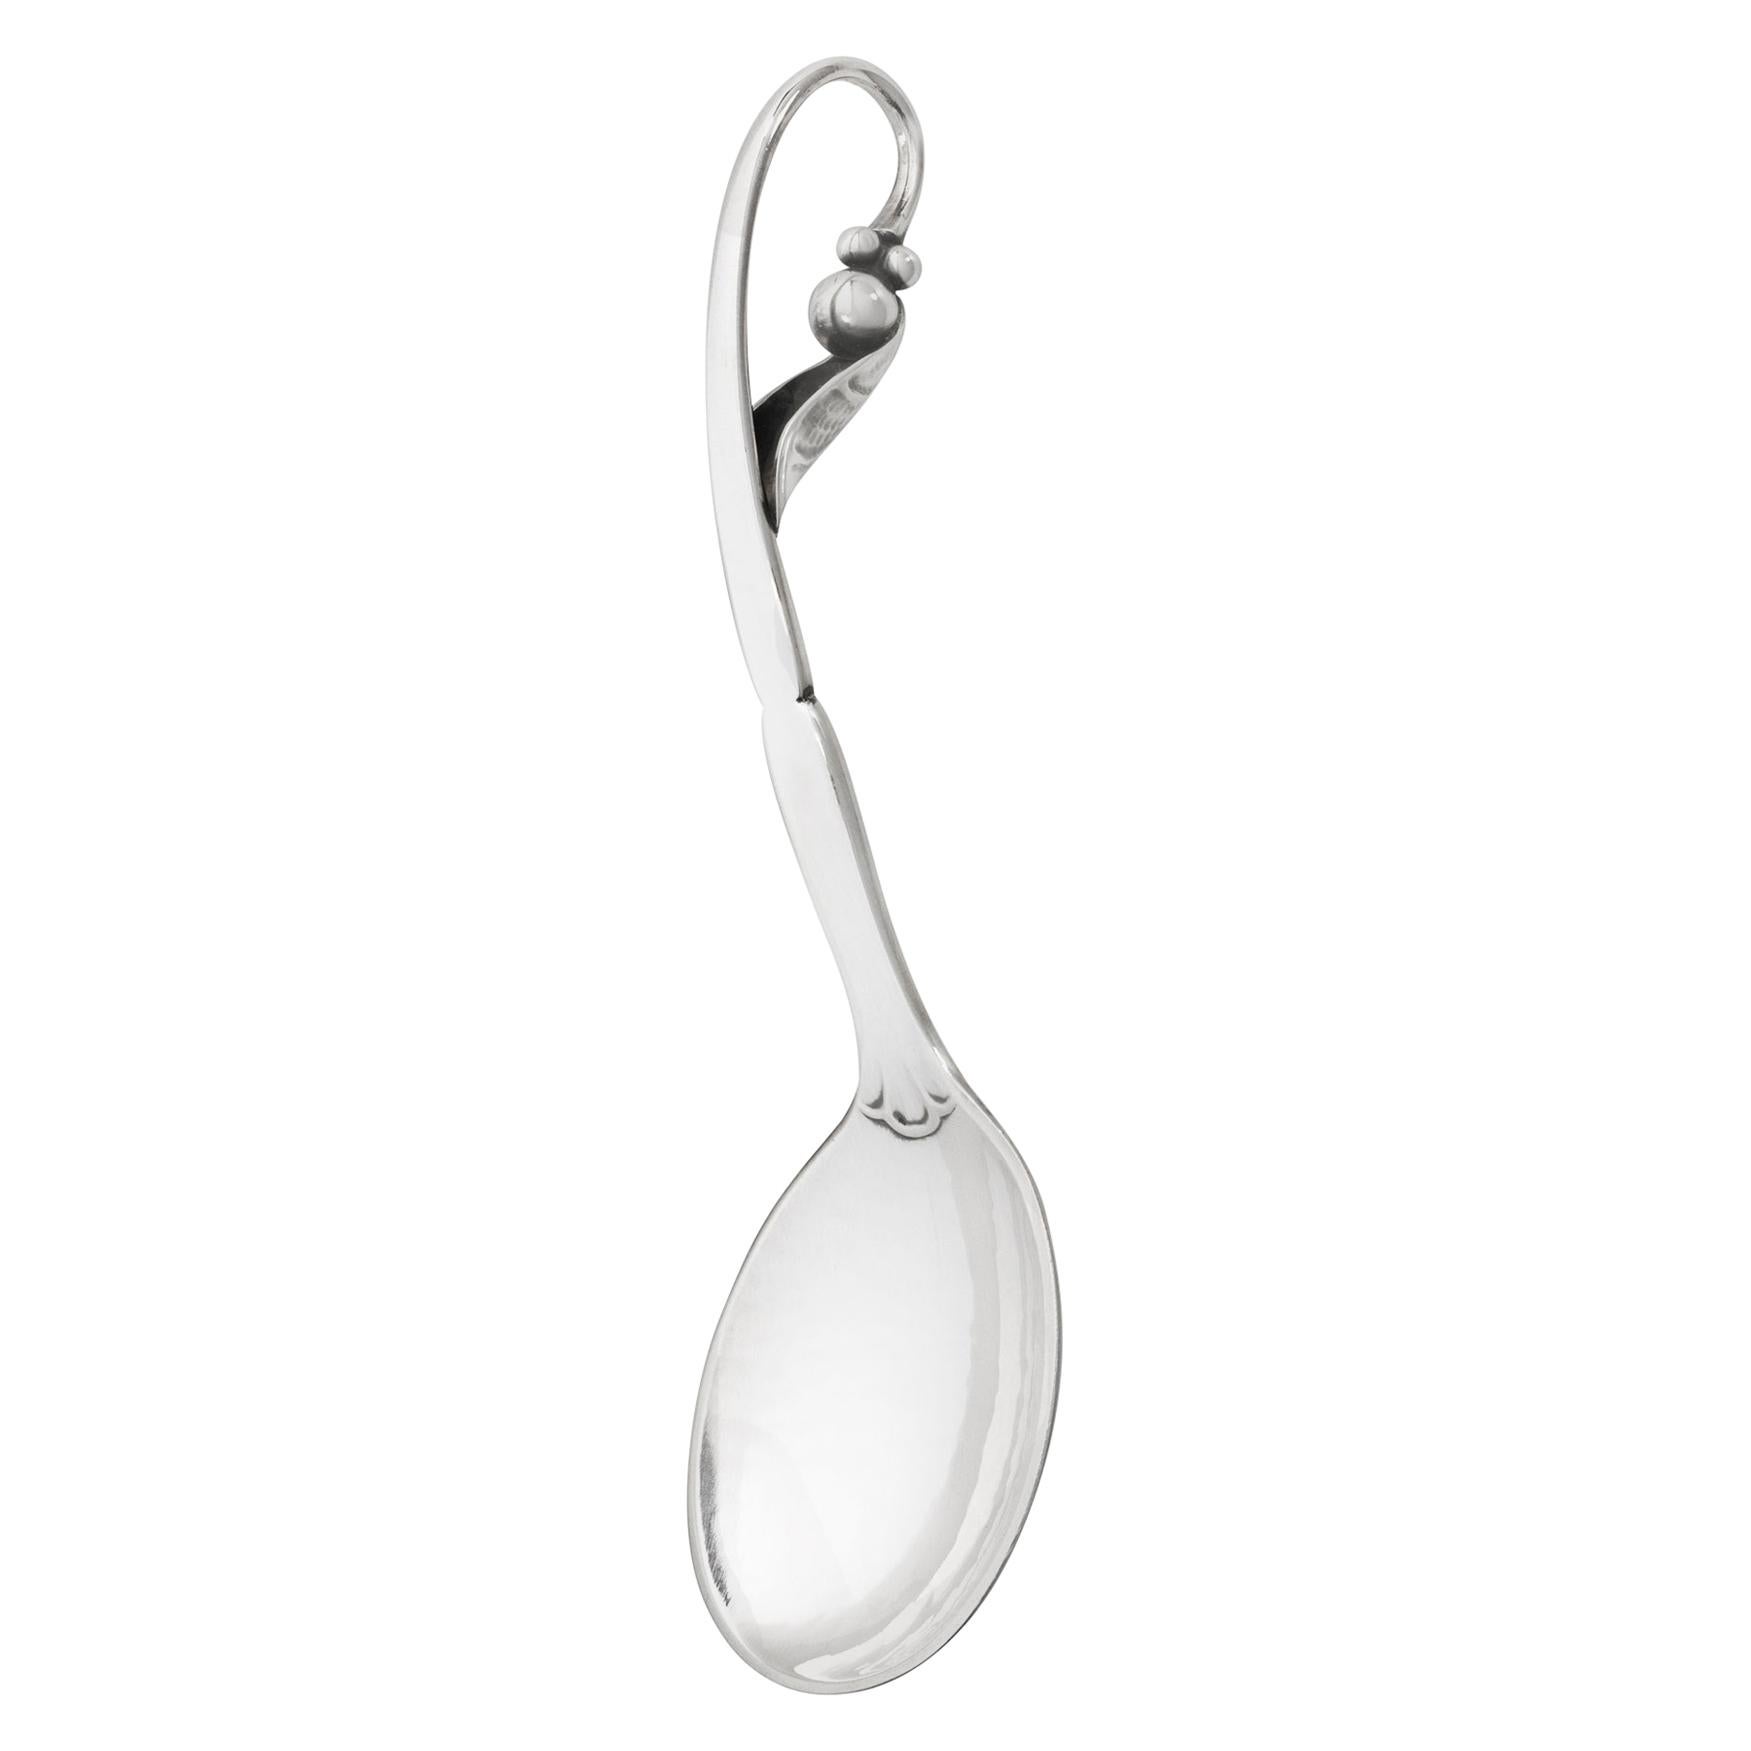 Georg Jensen Handcrafted Sterling Silver Ornamental No. 21 Nut Spoon For Sale